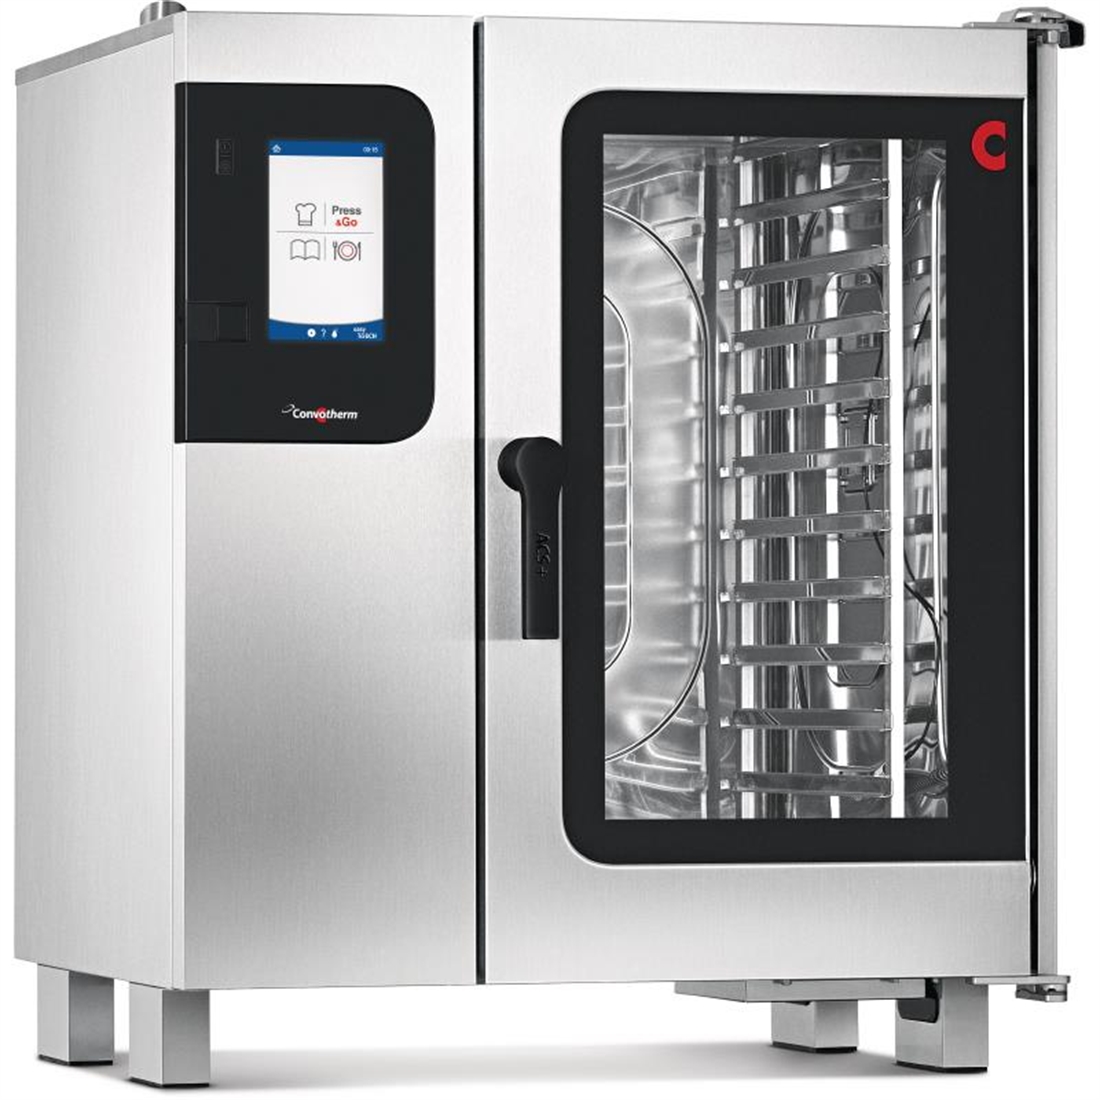 Convotherm 4 easyTouch Combi Oven 10 x 1 x1 GN Grid with ConvoGrill